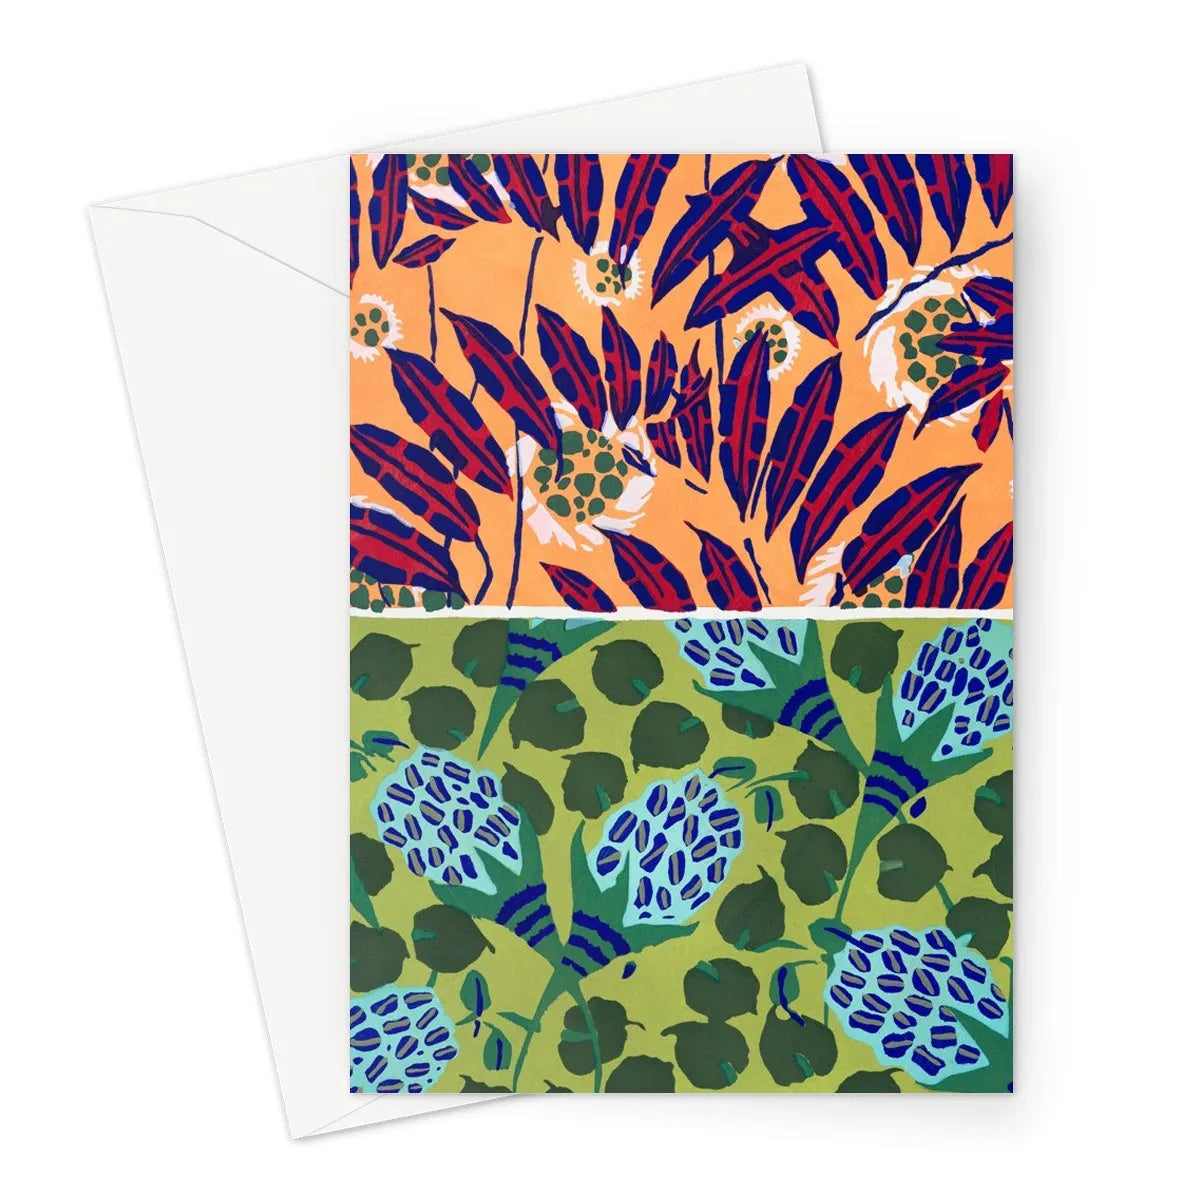 Suggestions Pour étoffes Et Tapis By E. A. Séguy Greeting Card - A5 Portrait / 1 Card - Greeting & Note Cards